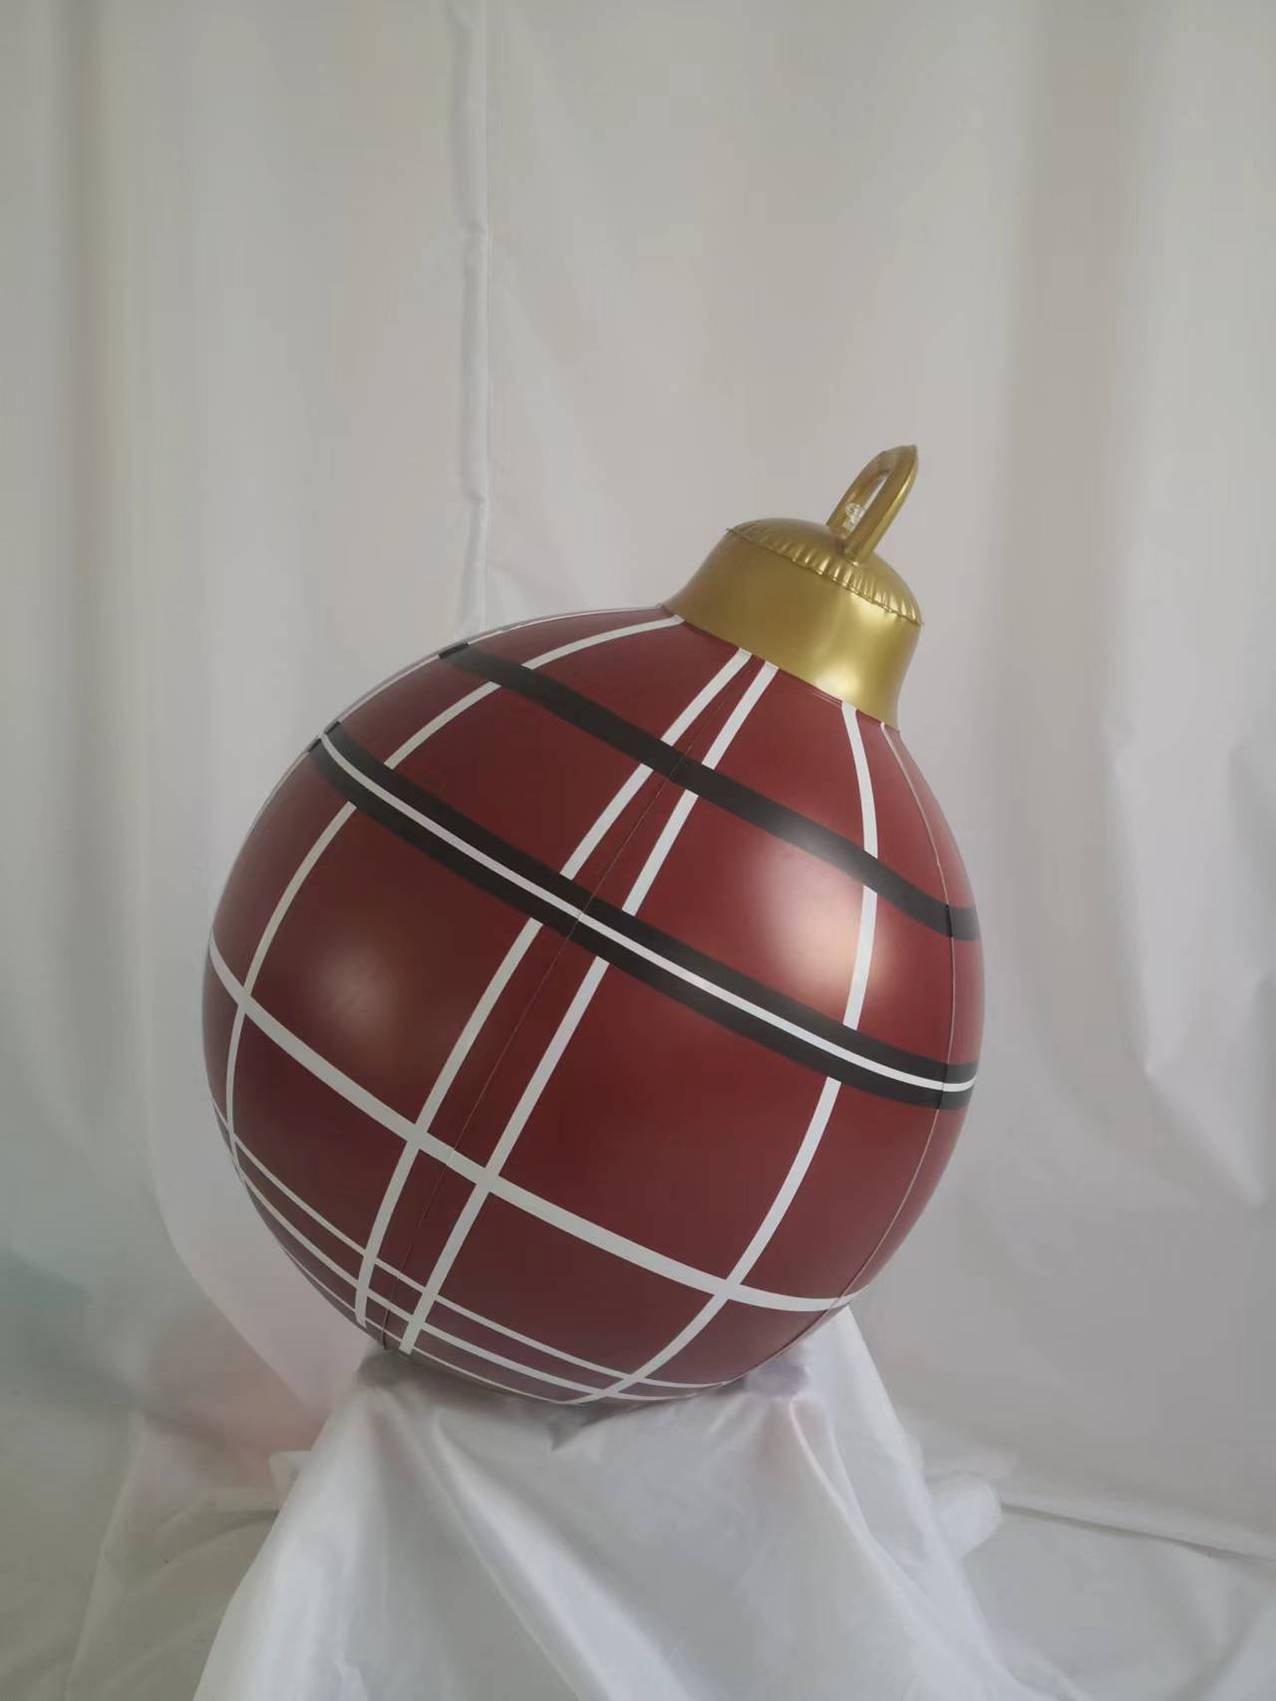 Customised Inflatable Chistmas Yard Decorations Indoor Outdoor Ornament Ball